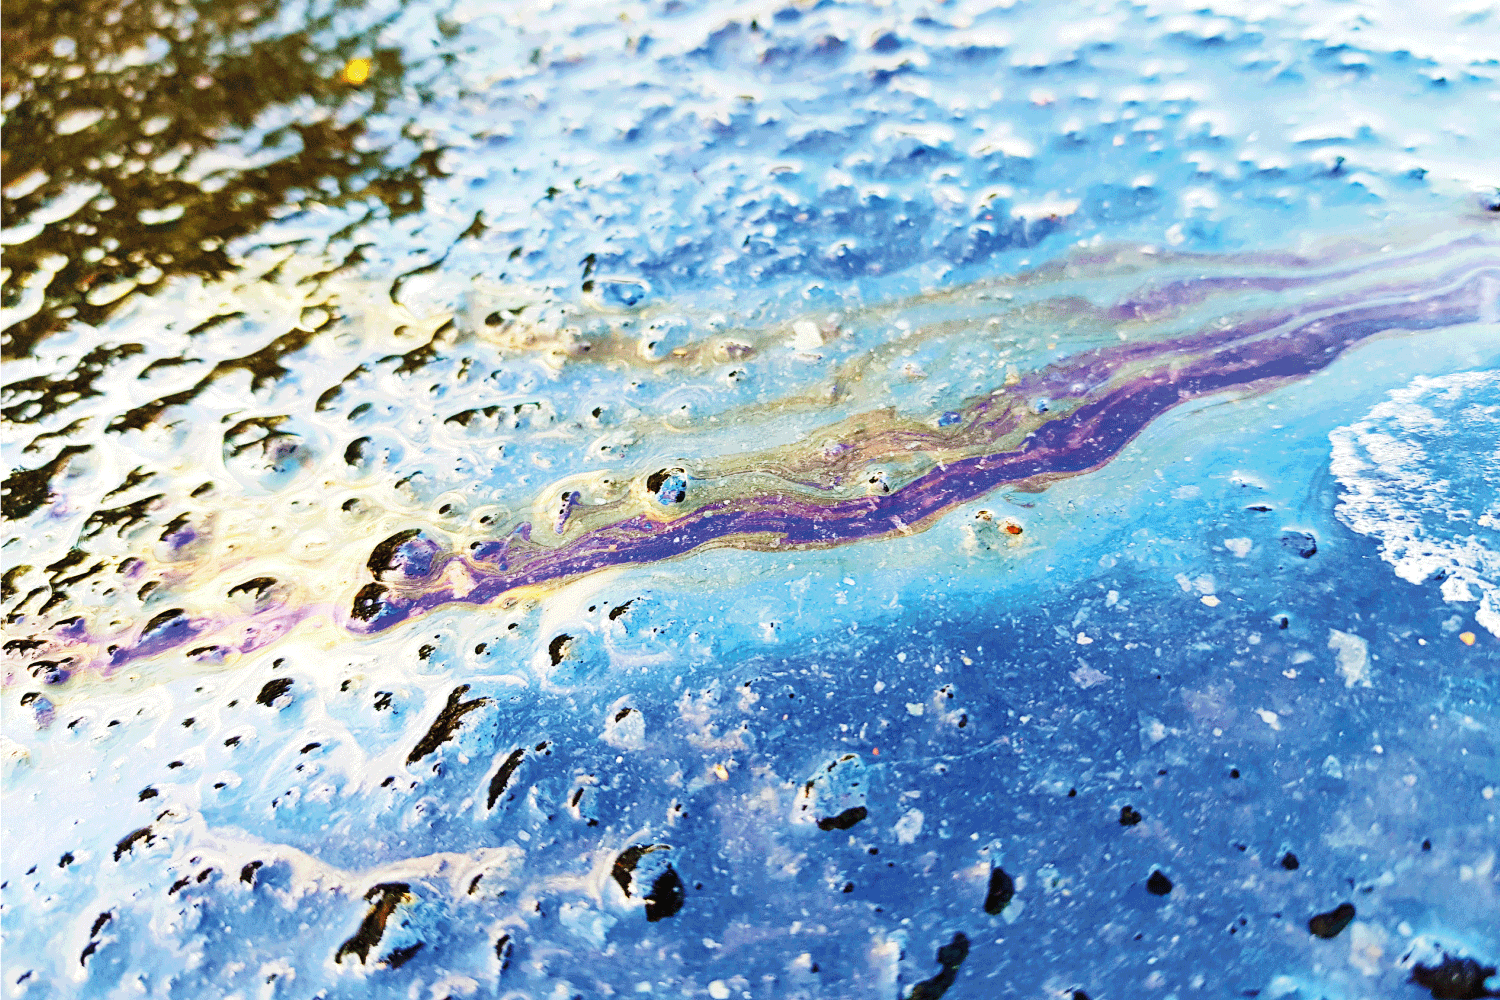 Oil on a rainy street produces a colorful spectrum.